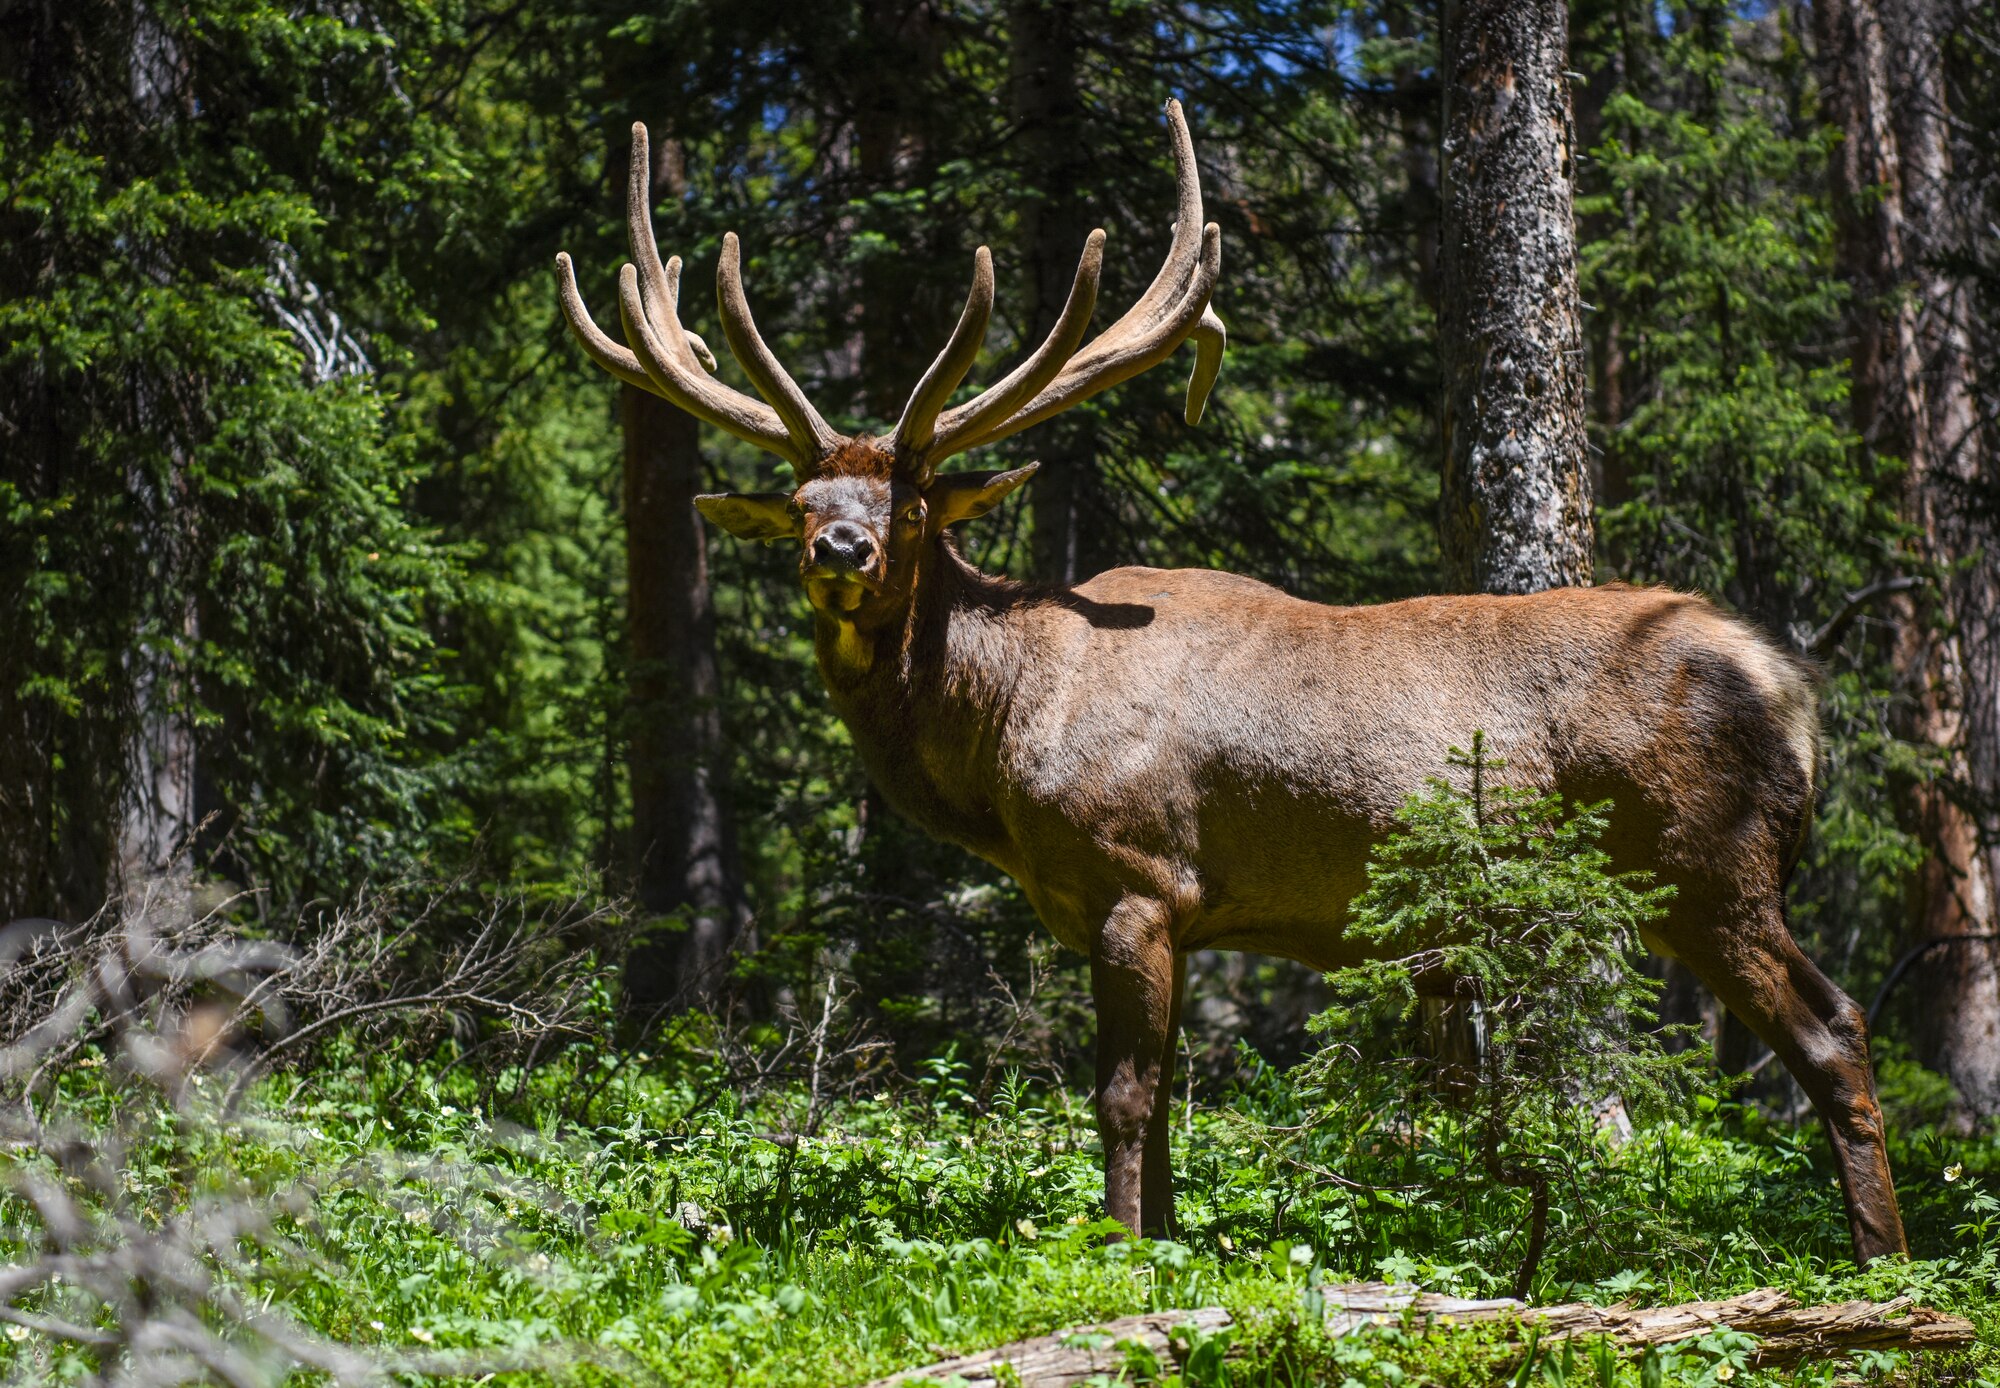 An Elk in a Colorado forest